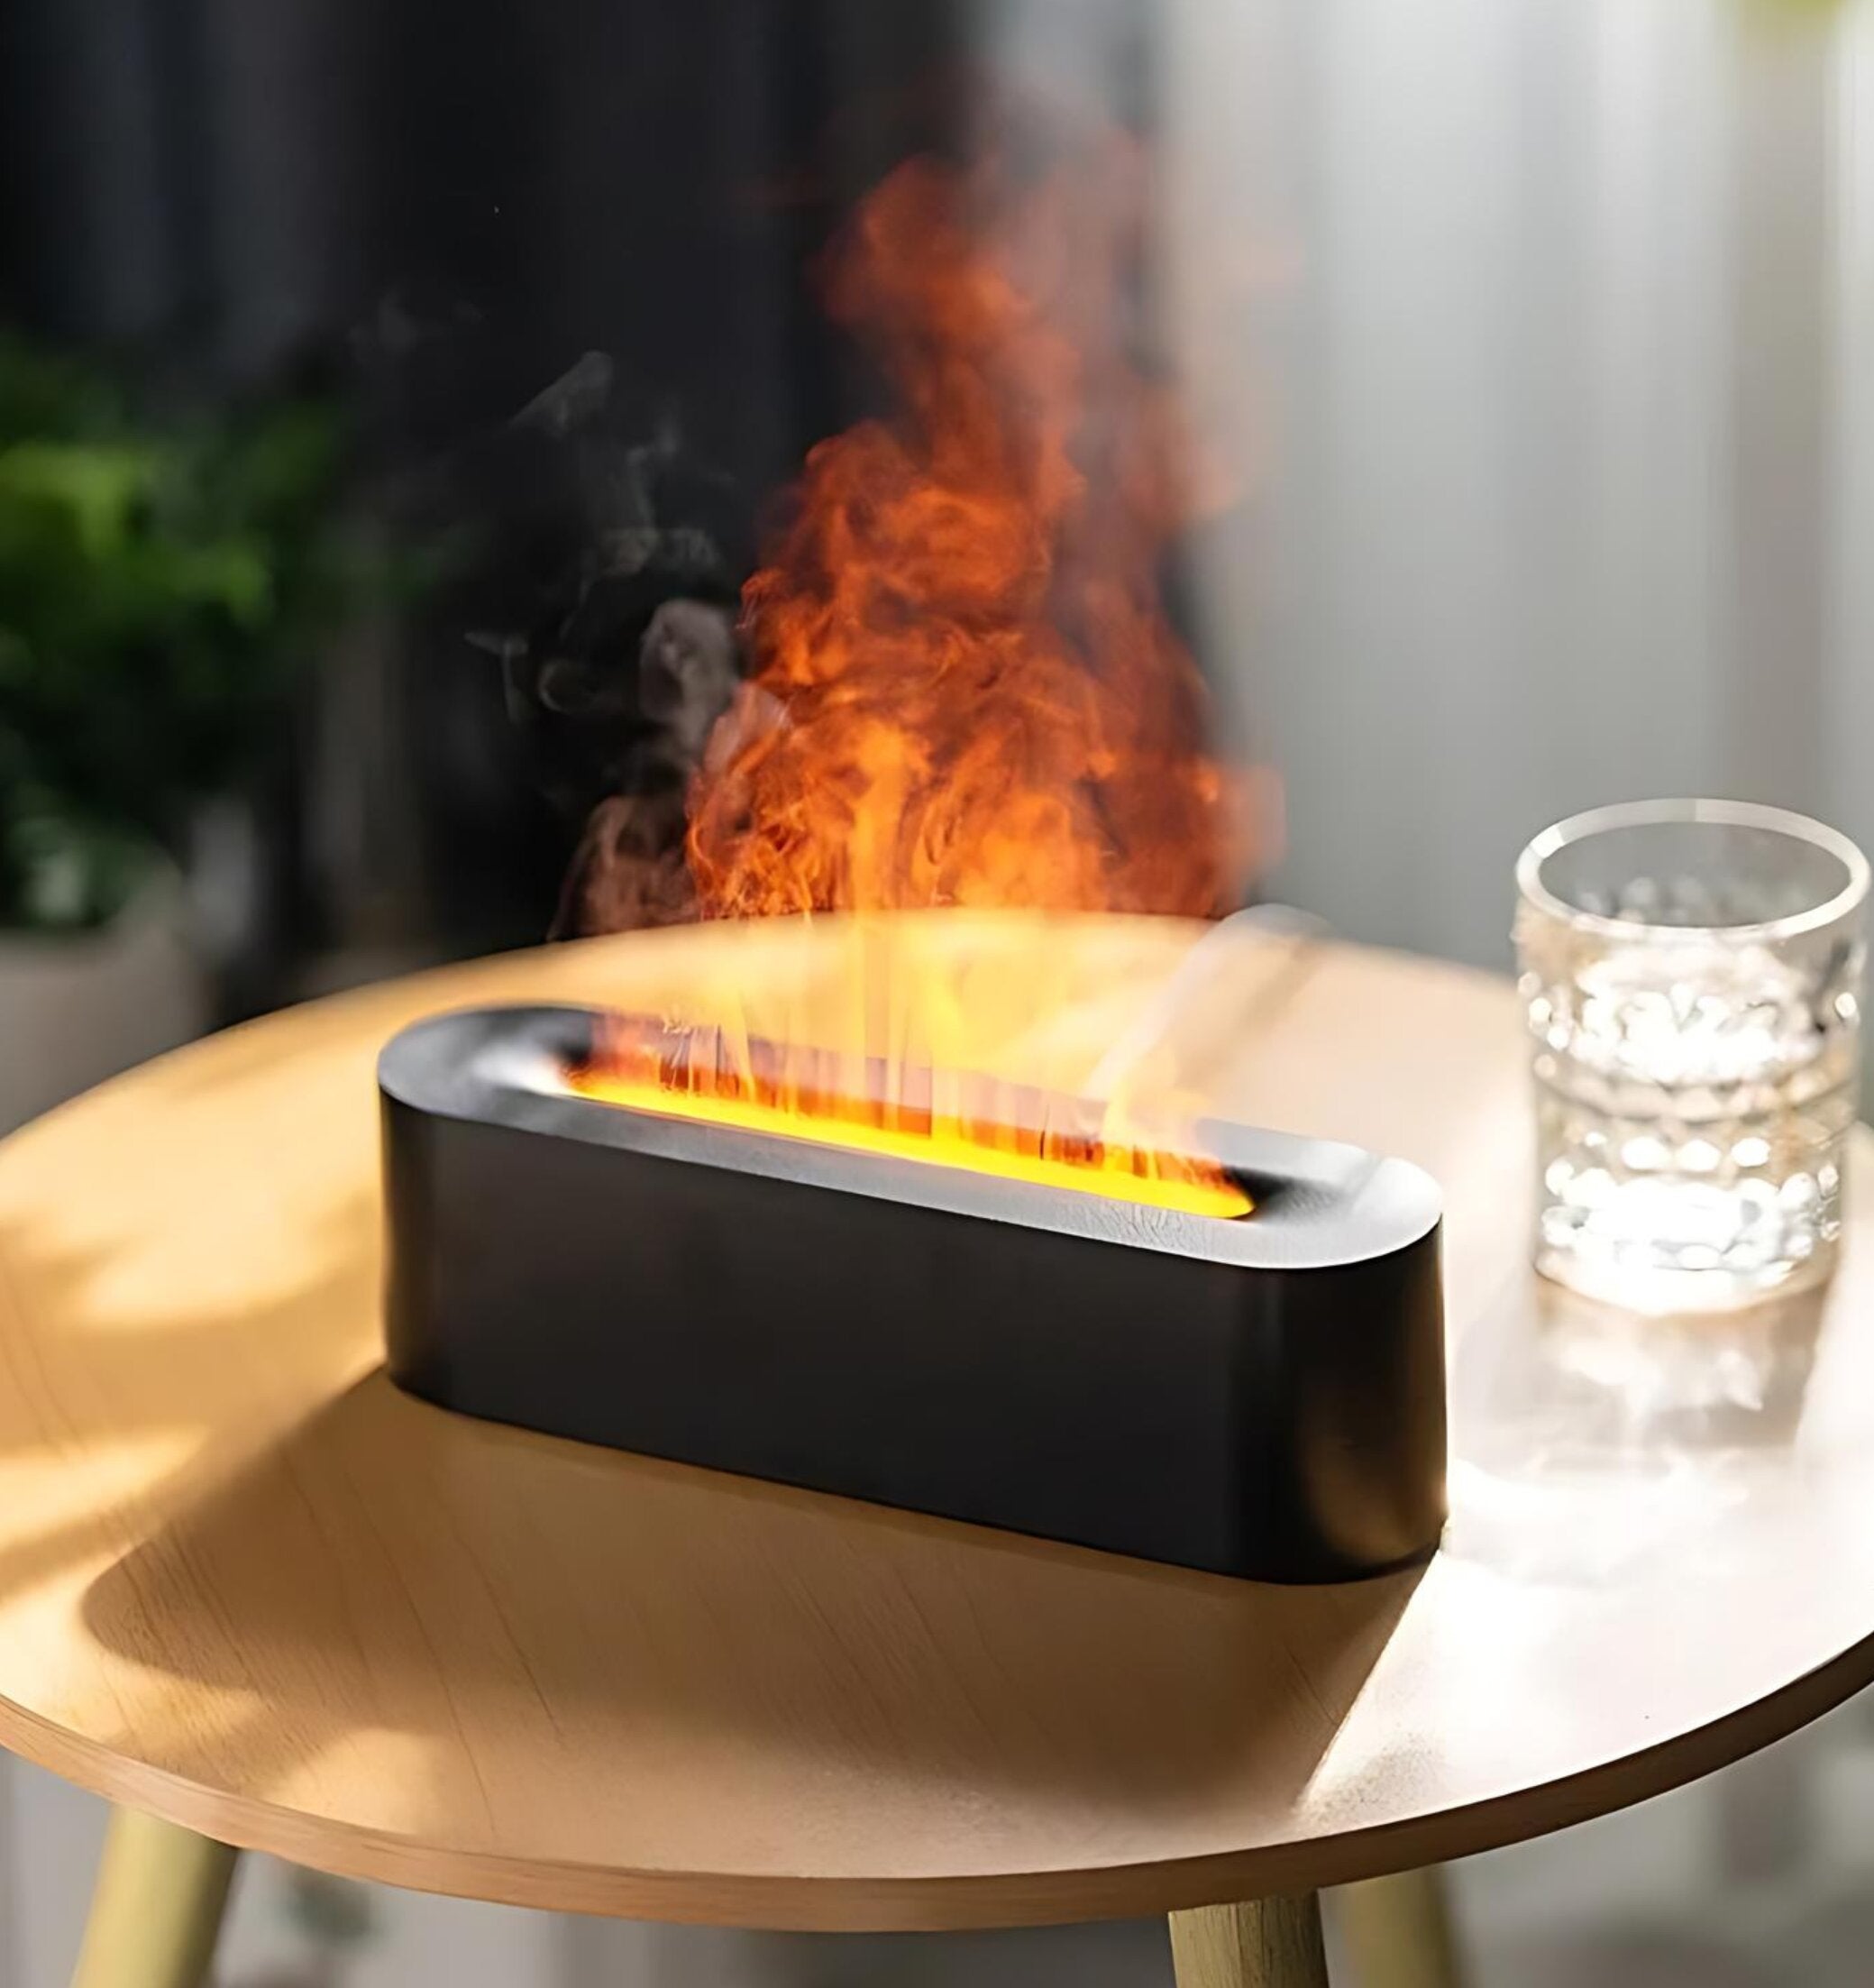 Stylish flame aroma diffuser on the table.